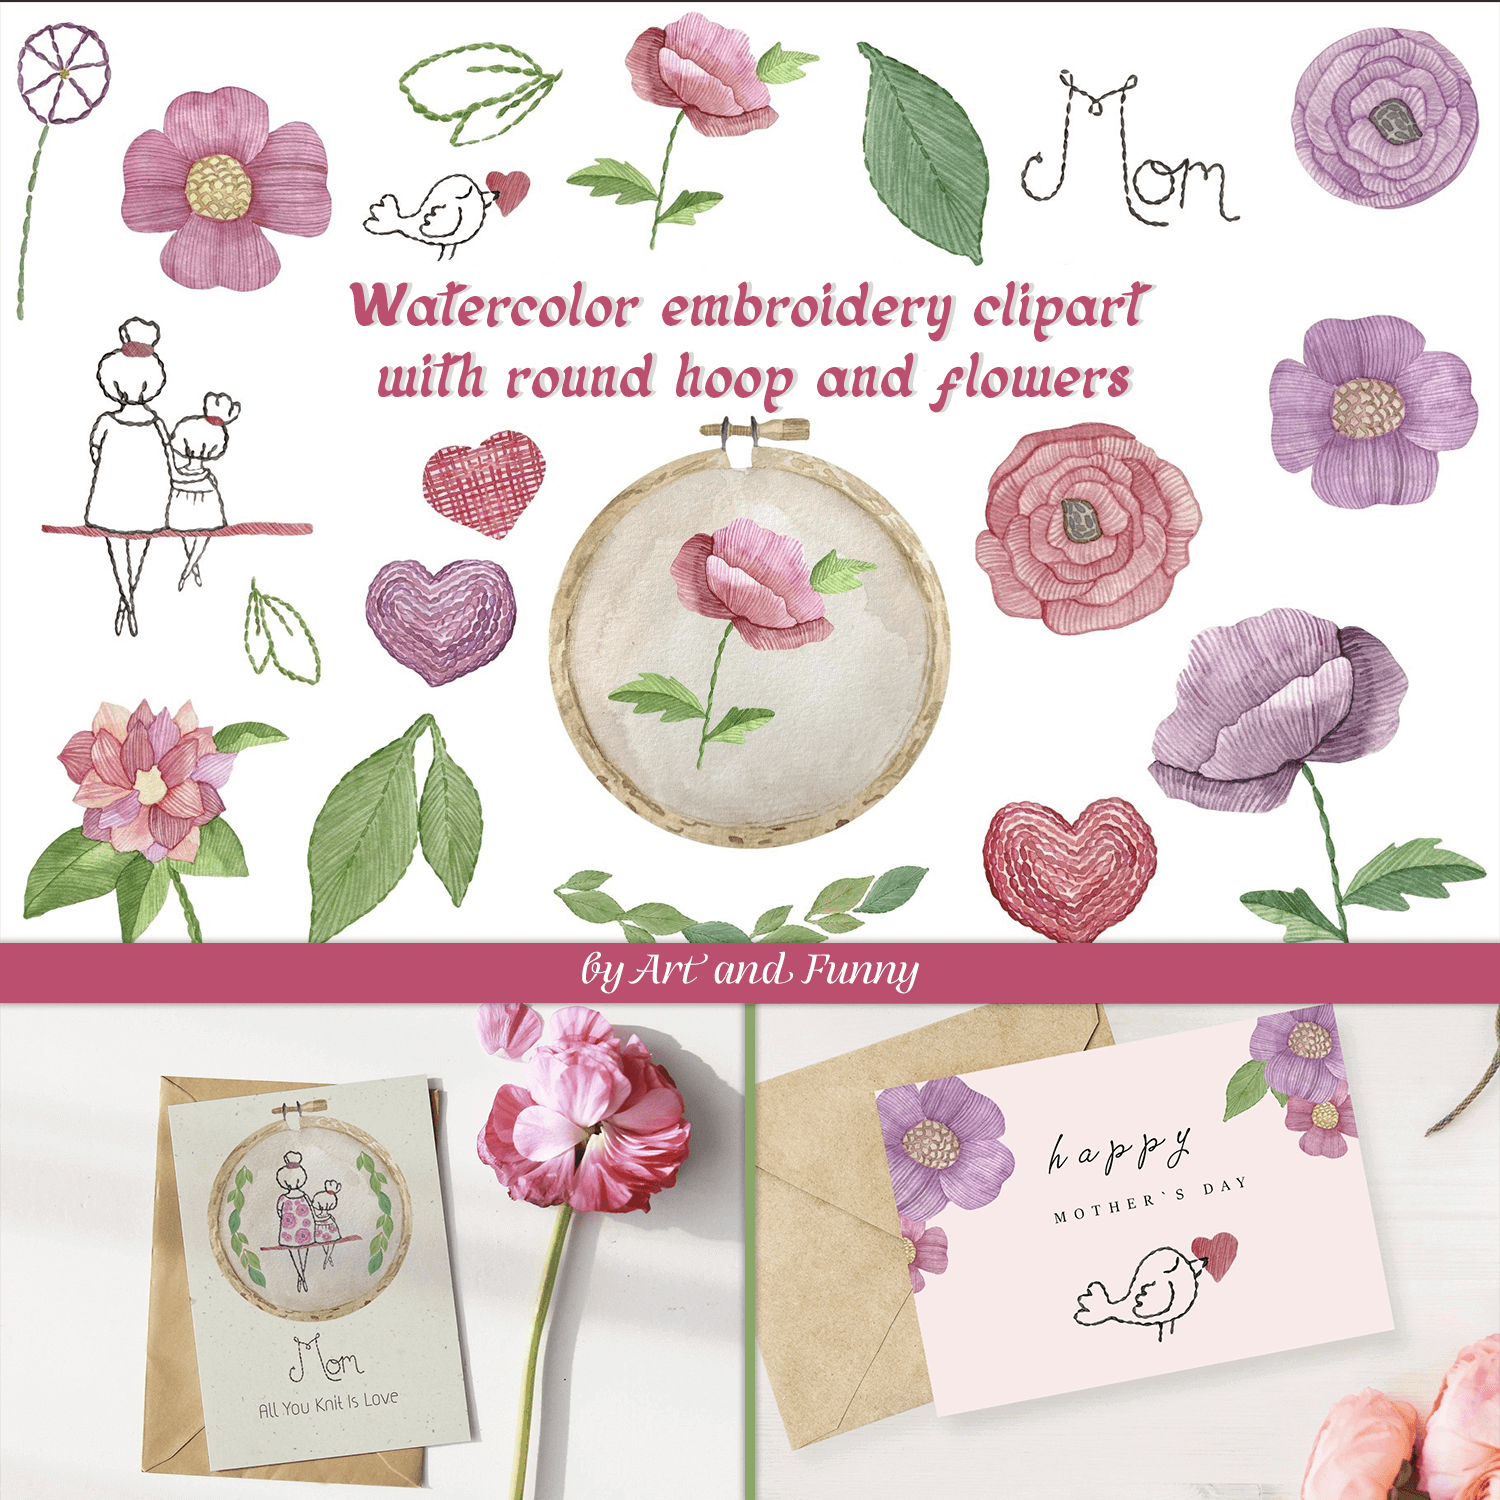 Watercolor embroidery clipart with round hoop and flowers.